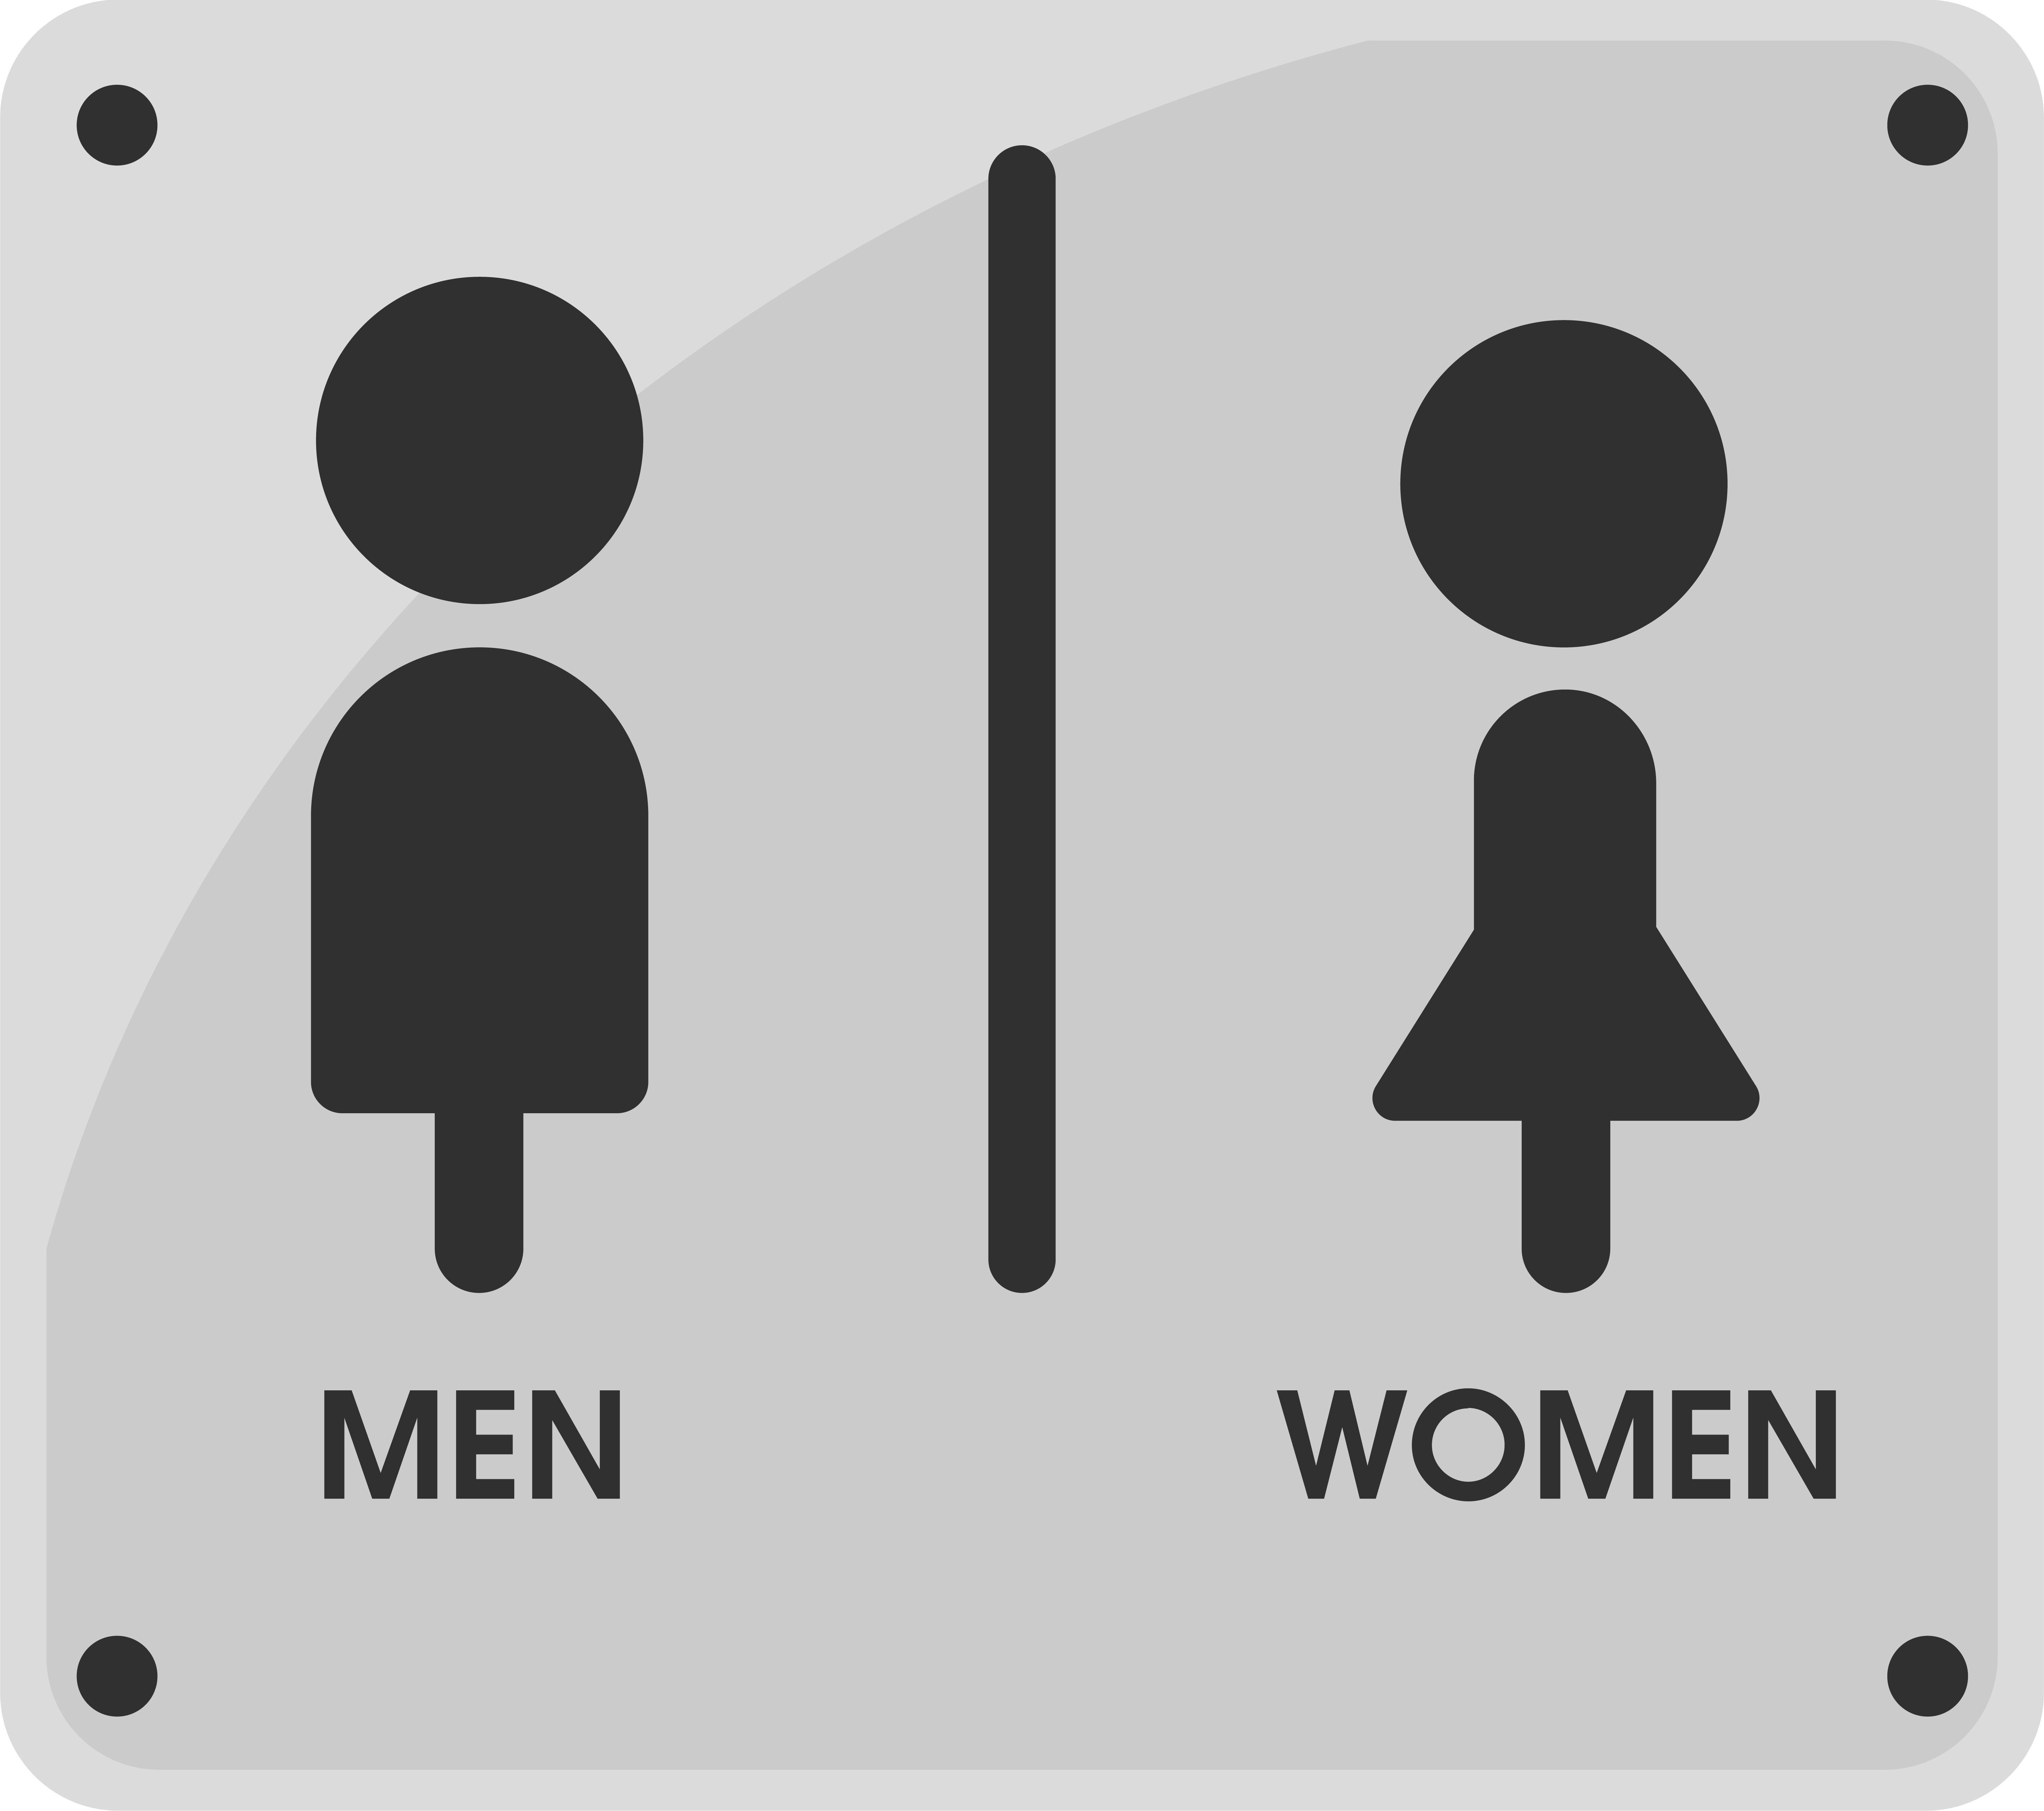 Men and Women Toilet sign icon themes That looks simple and modern ... Man And Woman Bathroom Symbol